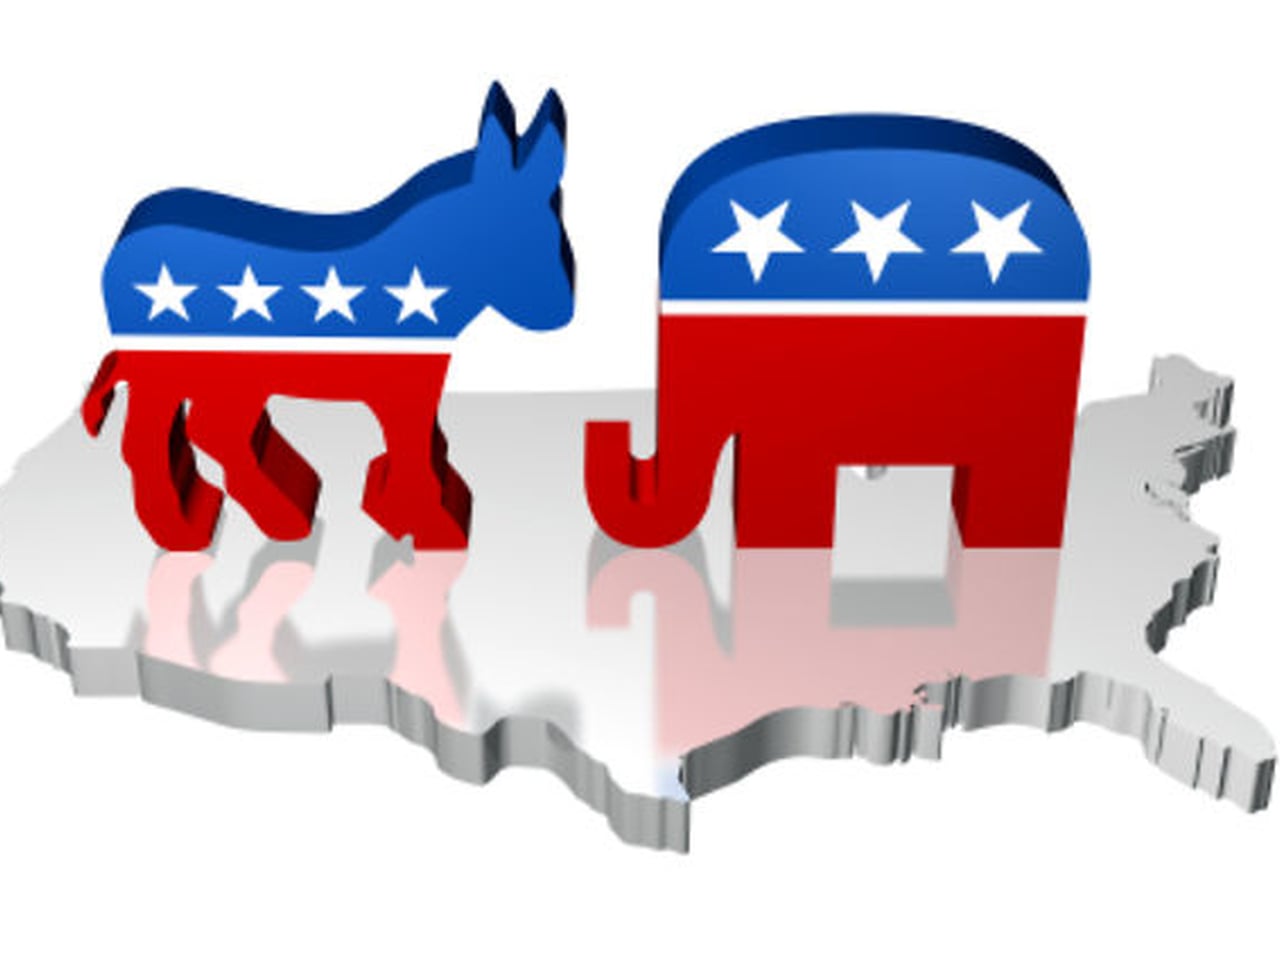 10 Essential Pros and Cons of a Two Party System